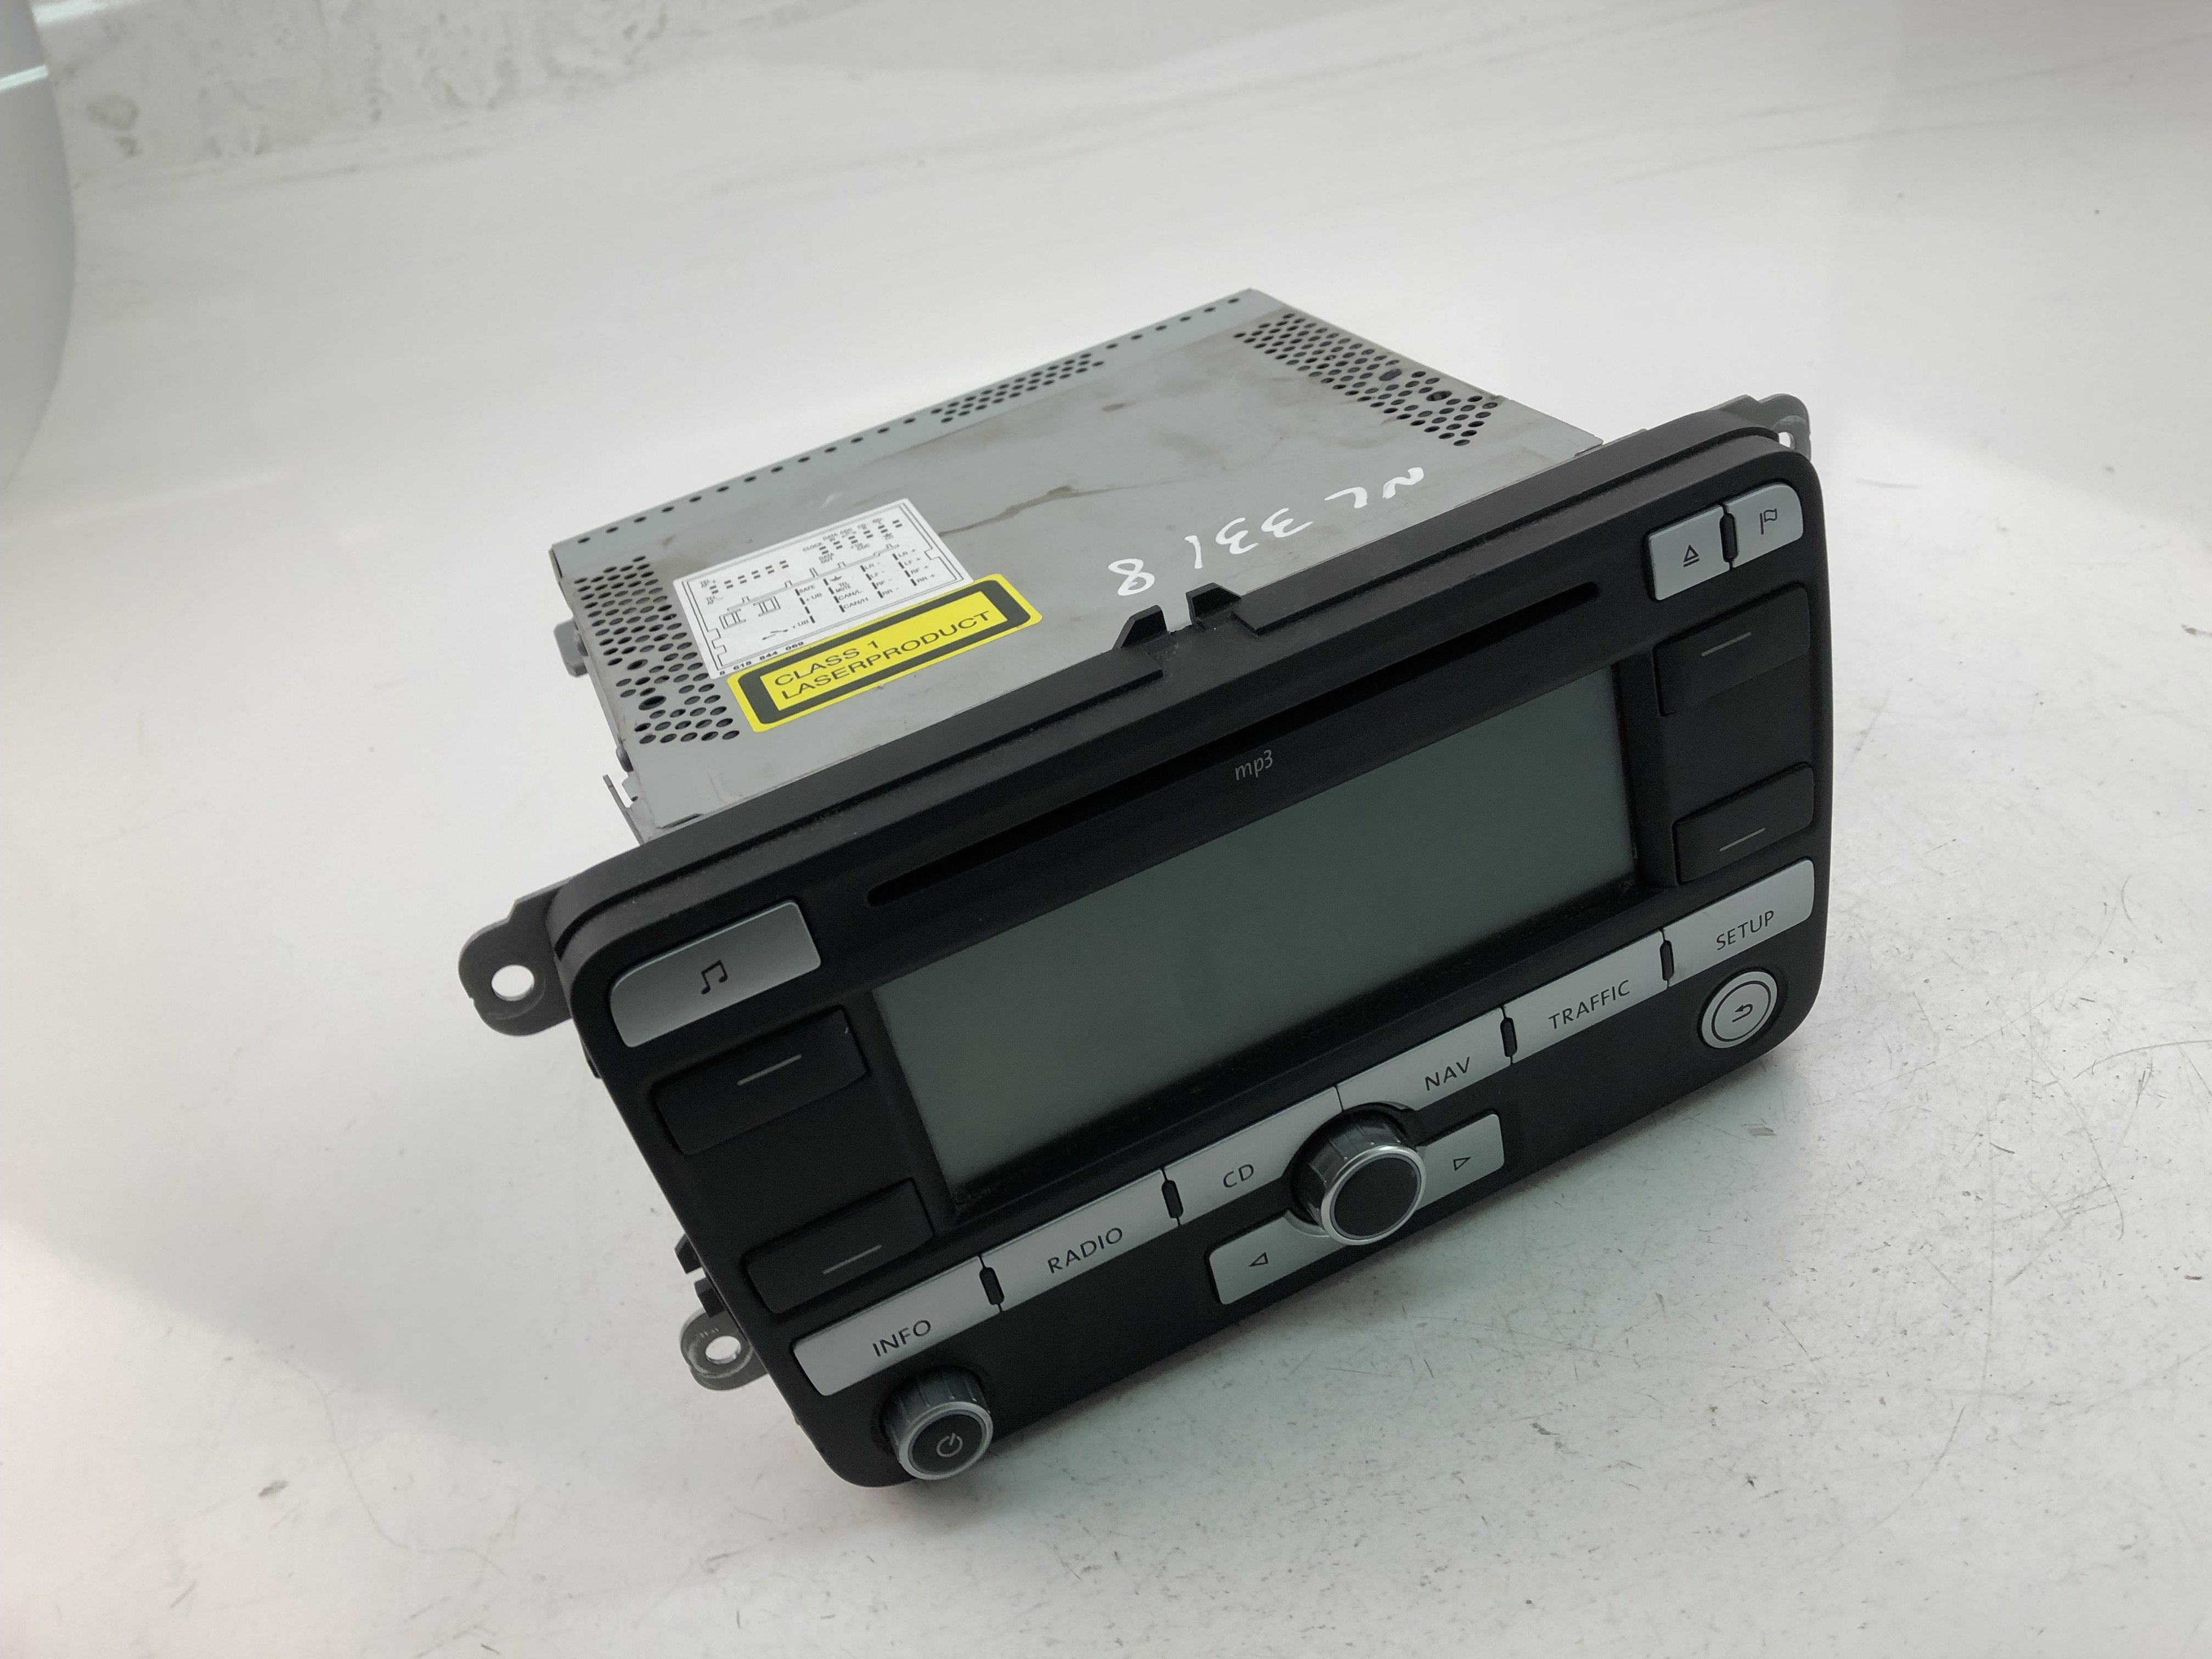 VOLKSWAGEN Touran 1 generation (2003-2015) Music Player Without GPS 1K0035191D 23492287